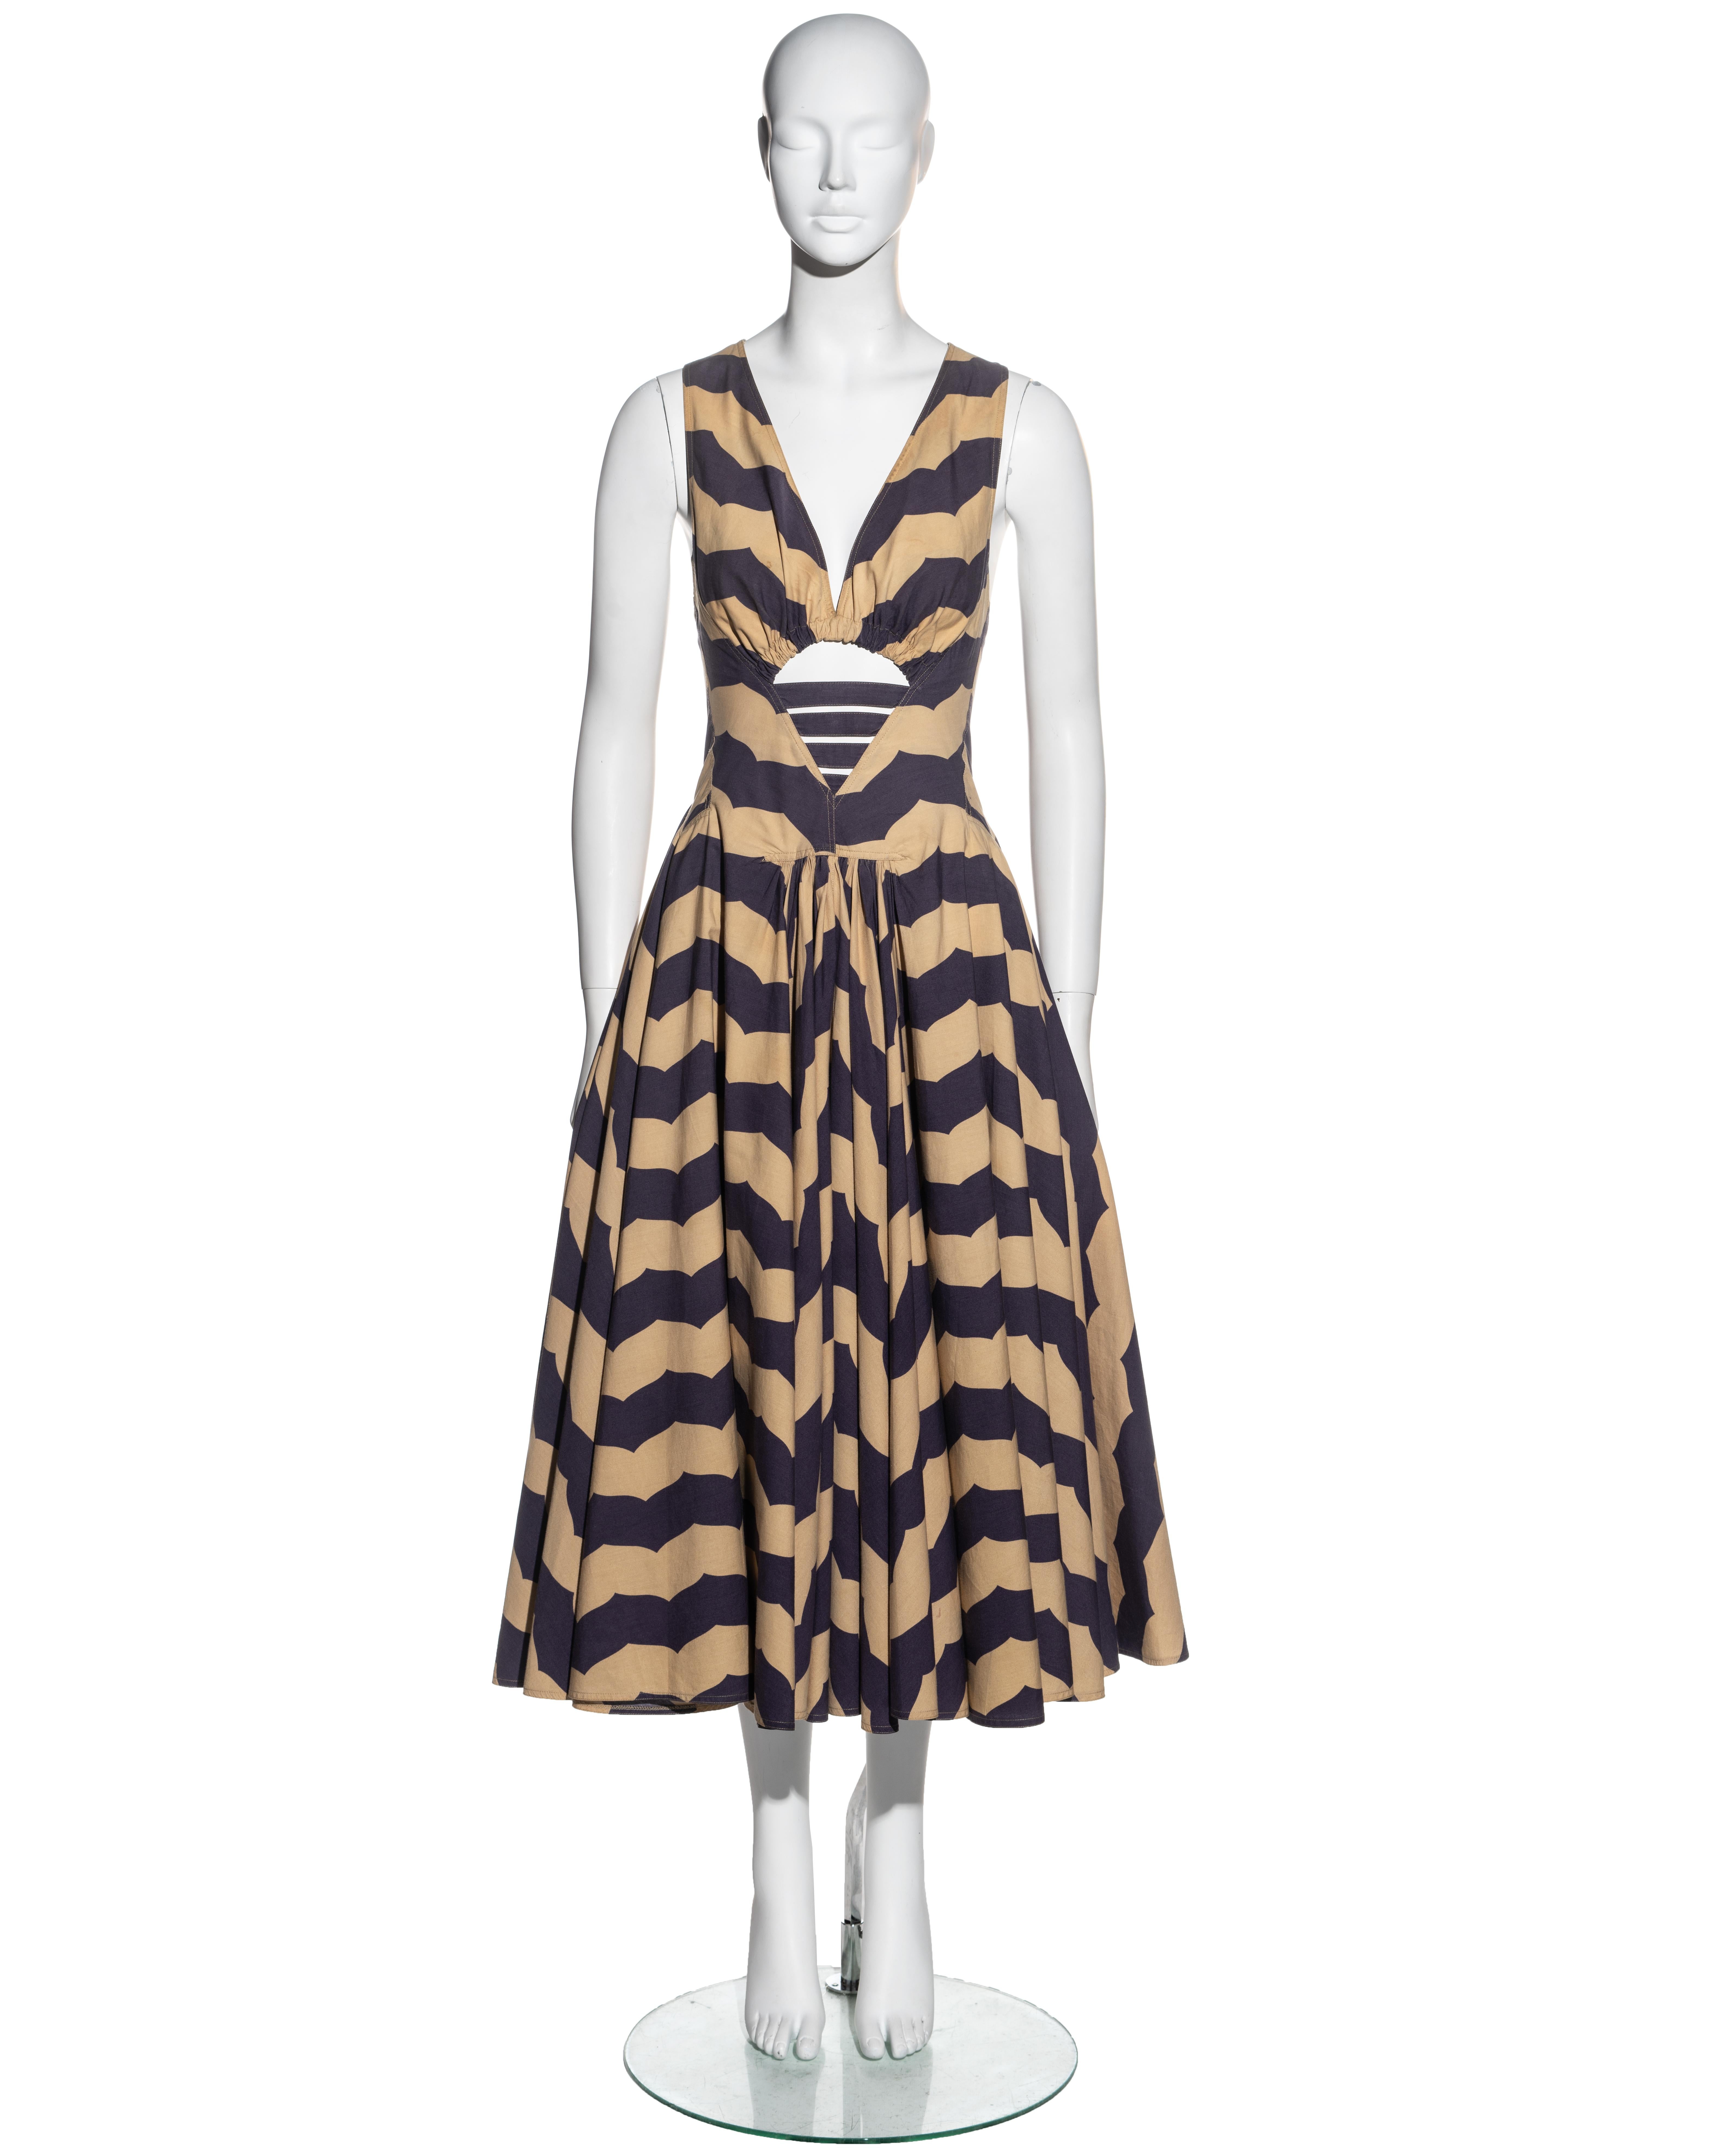 ▪ Azzedine Alaia purple and beige striped cotton dress 
▪ Plunging neckline 
▪ Broad straps 
▪ Midriff cut out 
▪ Cinched waist
▪ Long pleated circle skirt 
▪ Concealed zipper at centre back 
▪ 2 side pockets 
▪ Ankle length 
▪ Criss cross straps at